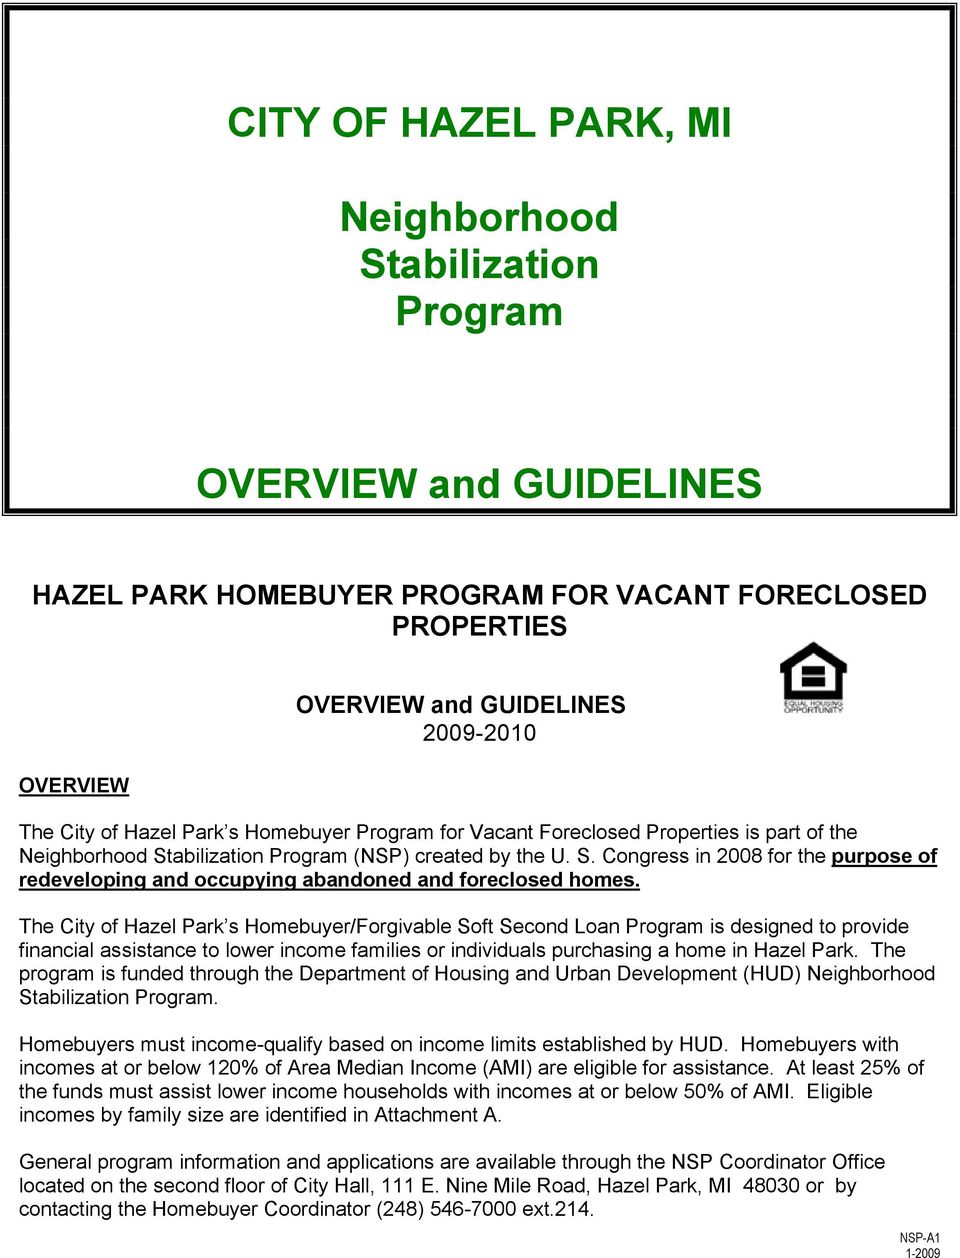 The City of Hazel Park s Homebuyer/Forgivable Soft Second Loan Program is designed to provide financial assistance to lower income families or individuals purchasing a home in Hazel Park.